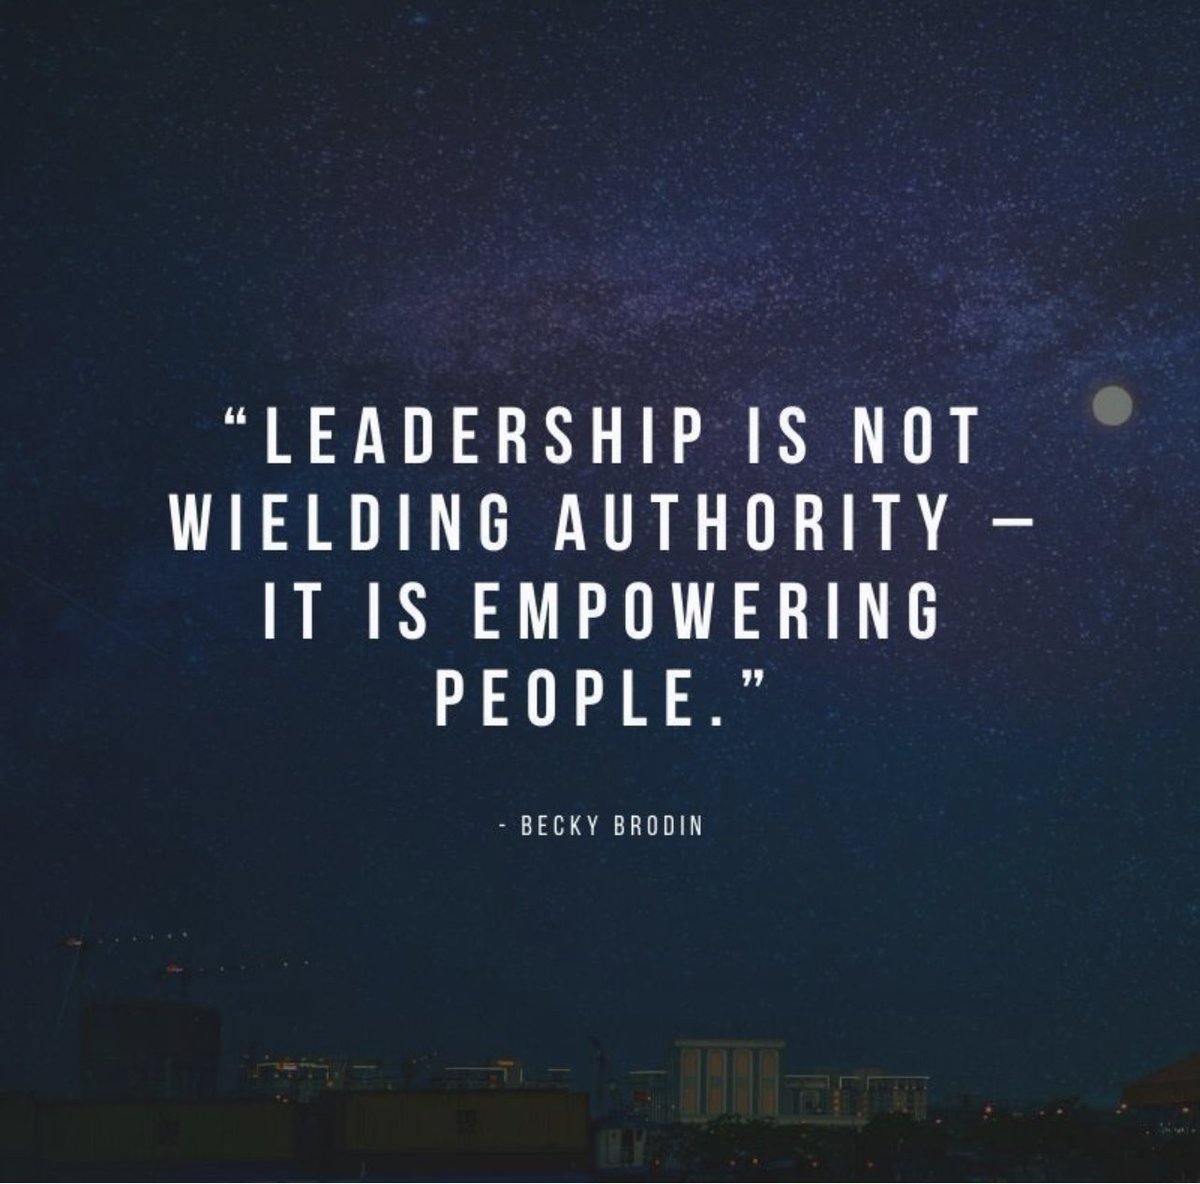 Who will you EMPOWER today?
Hold someone’s ladder and help them reach higher! #leadershift